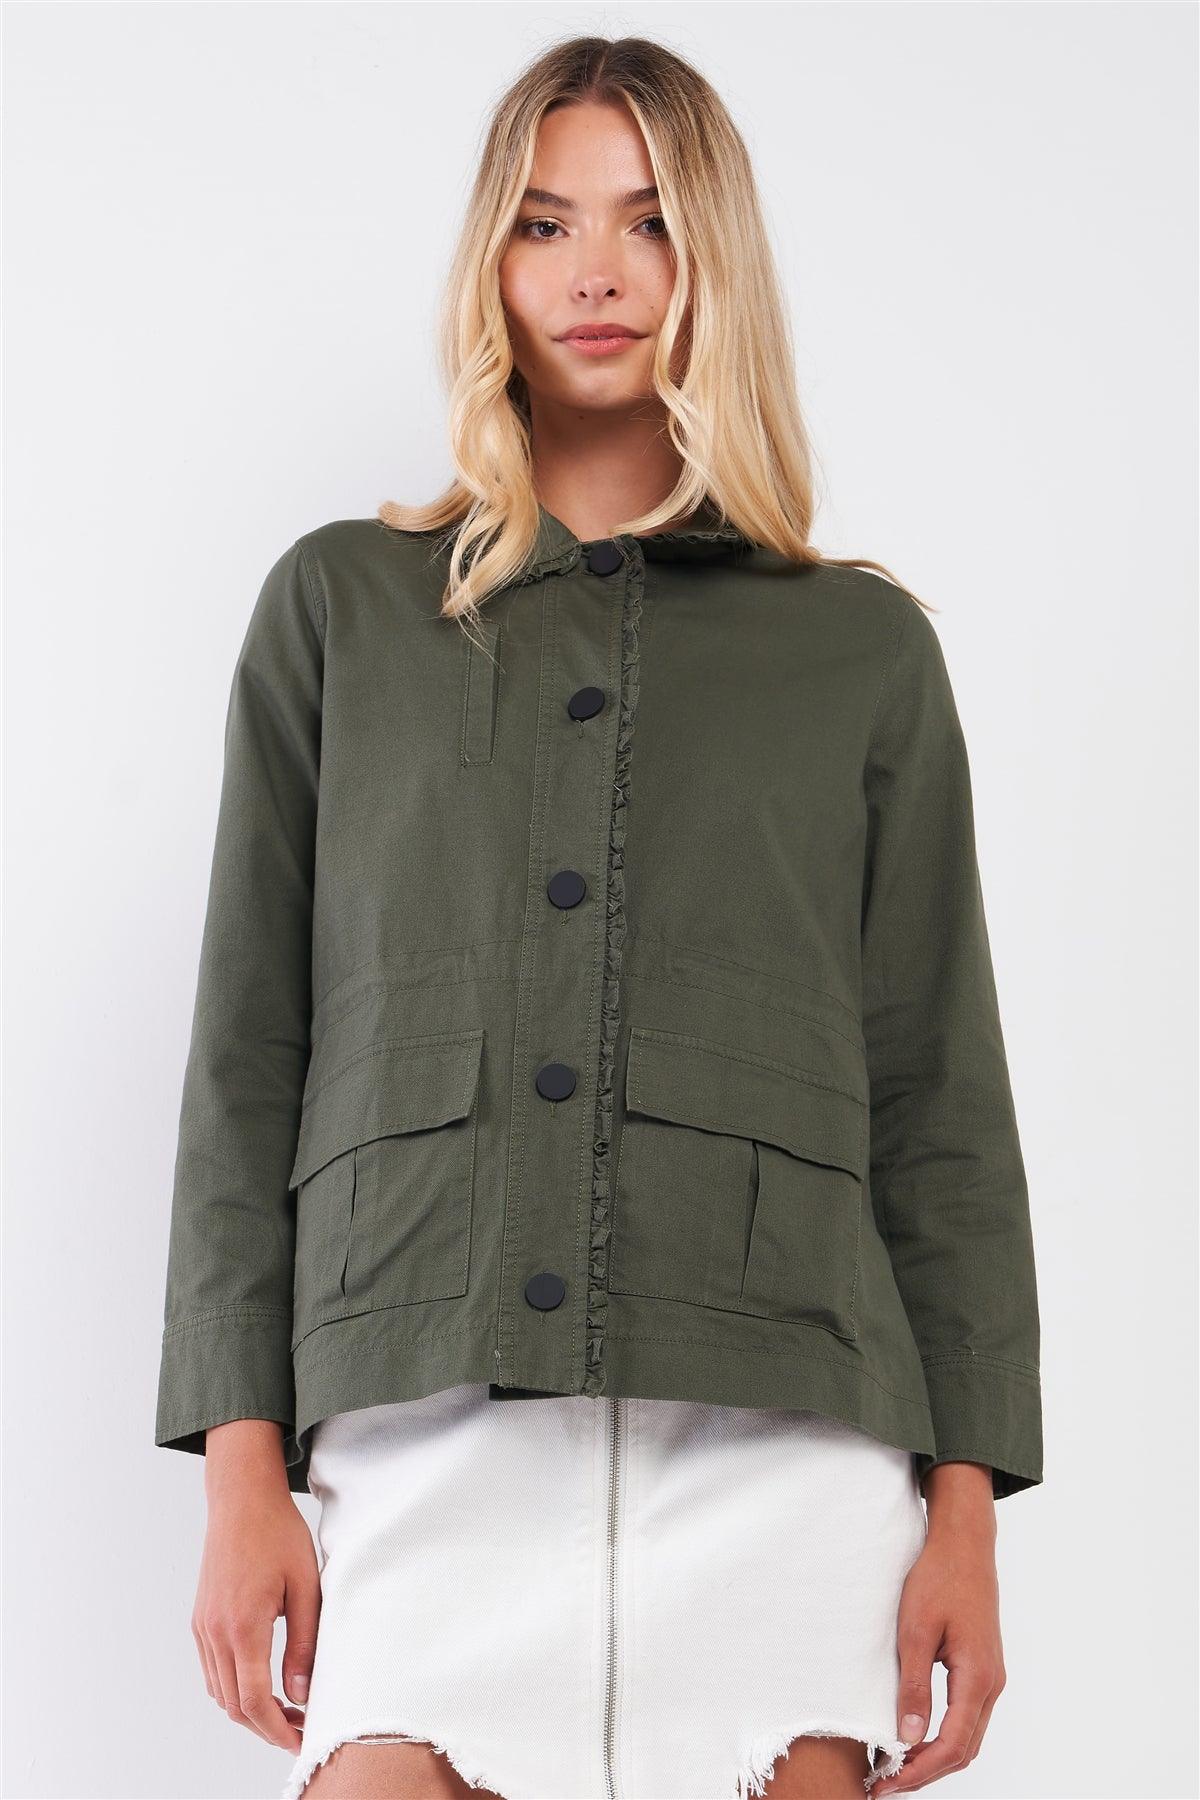 Olive Frill Trim Babydoll Collar Button-Down Front Adjustable Fitness Summer Jacket /1-2-2-1